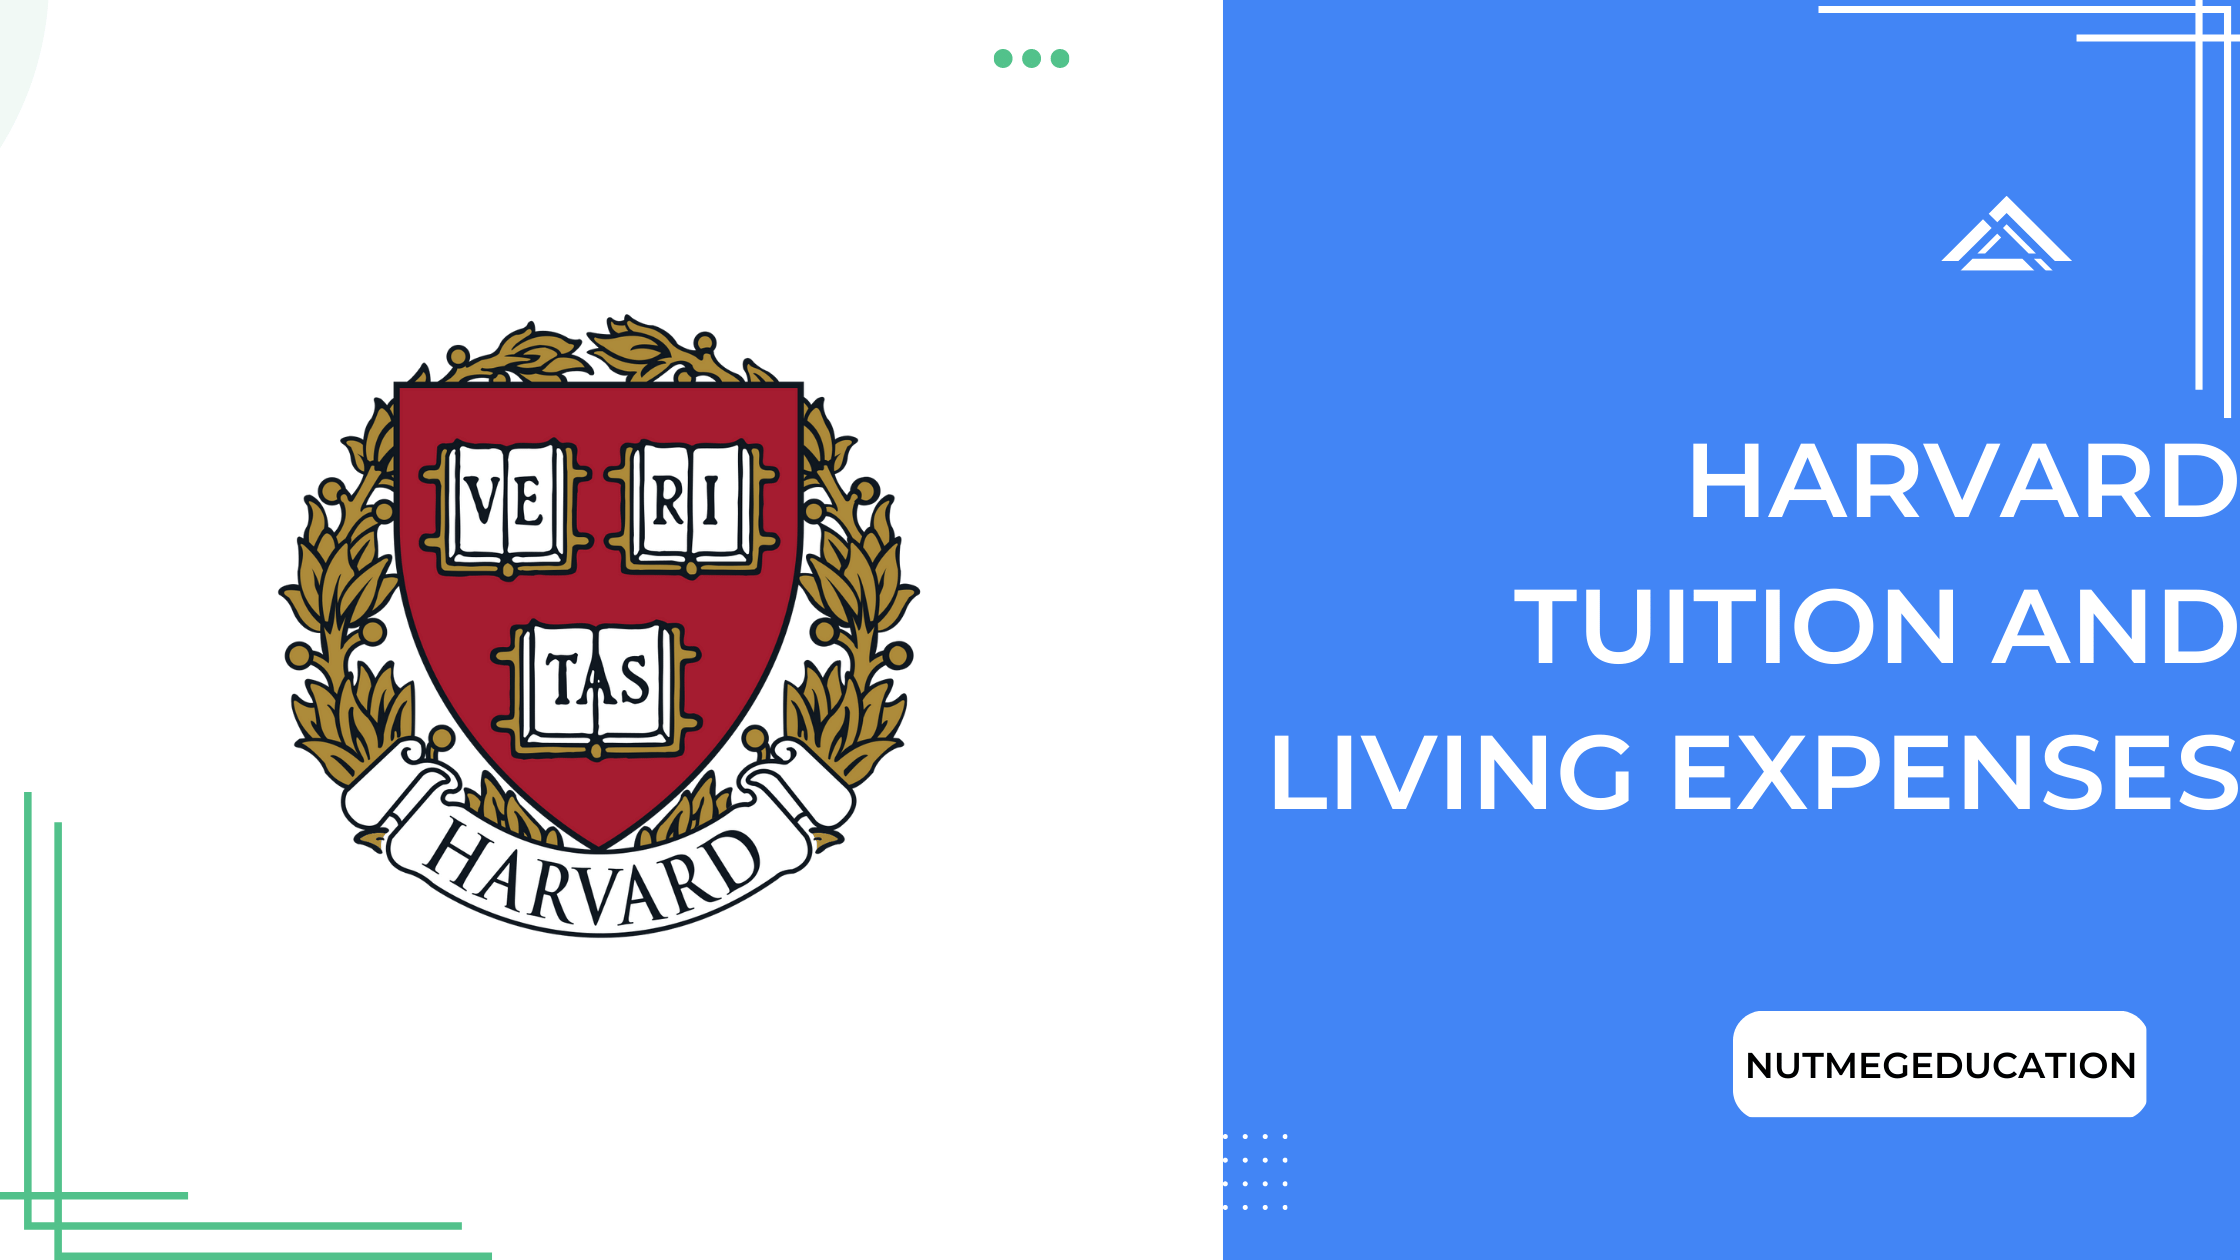 Harvard Tuition And Living Expenses - NutMegEducation